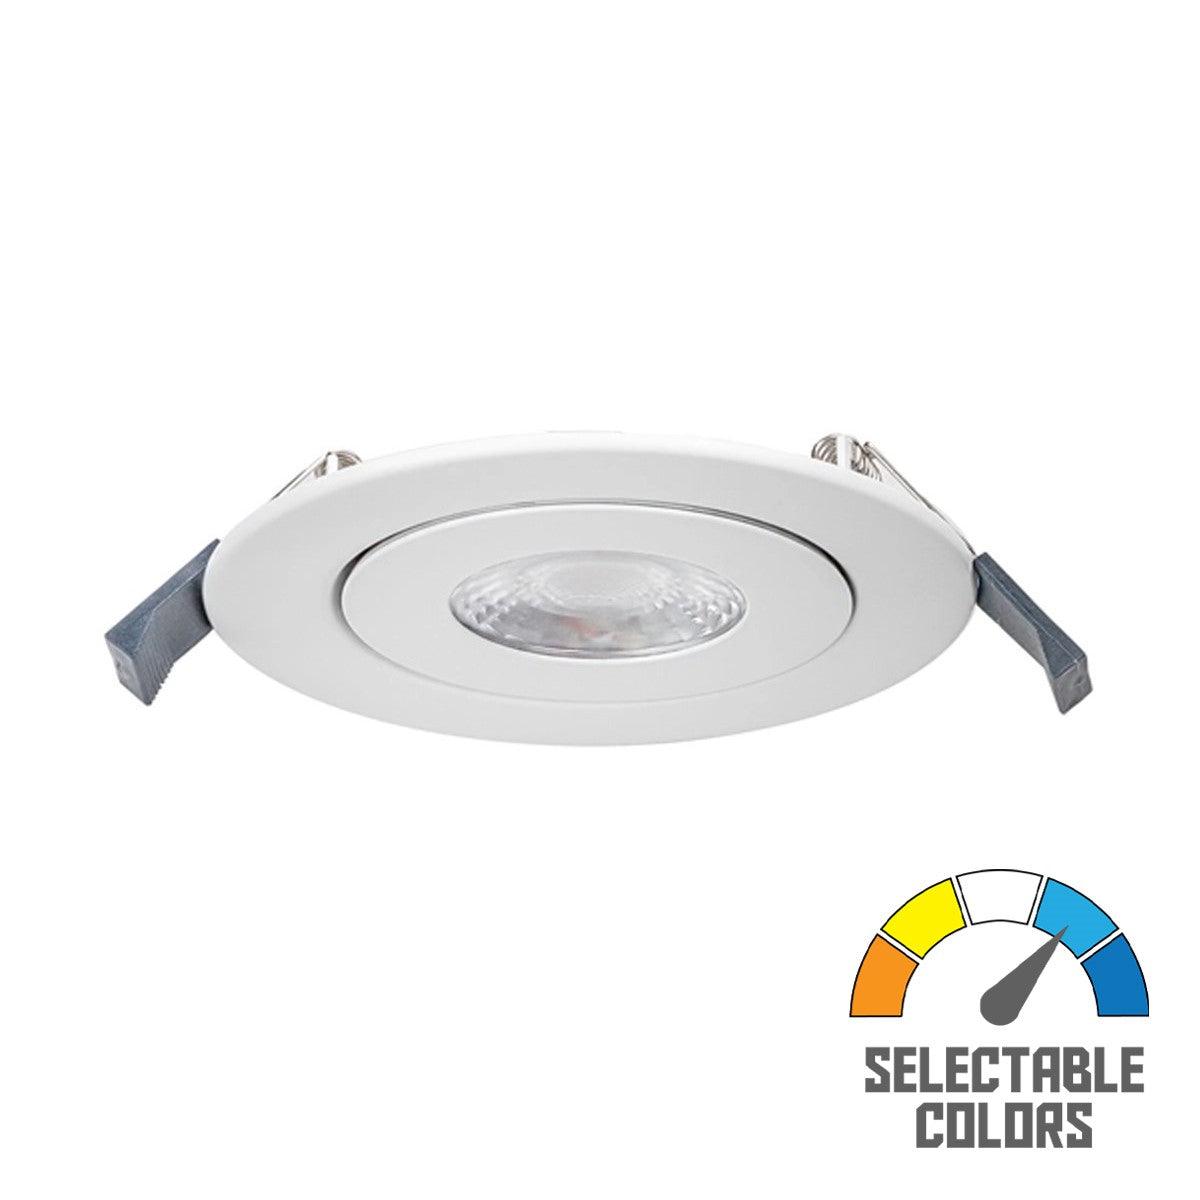 6 In. Lotos LED Adjustable Canless LED Recessed Light, 15 Watt, 1340 Lumens, Selectable CCT, 2700K to 5000K, 120/277V - Bees Lighting